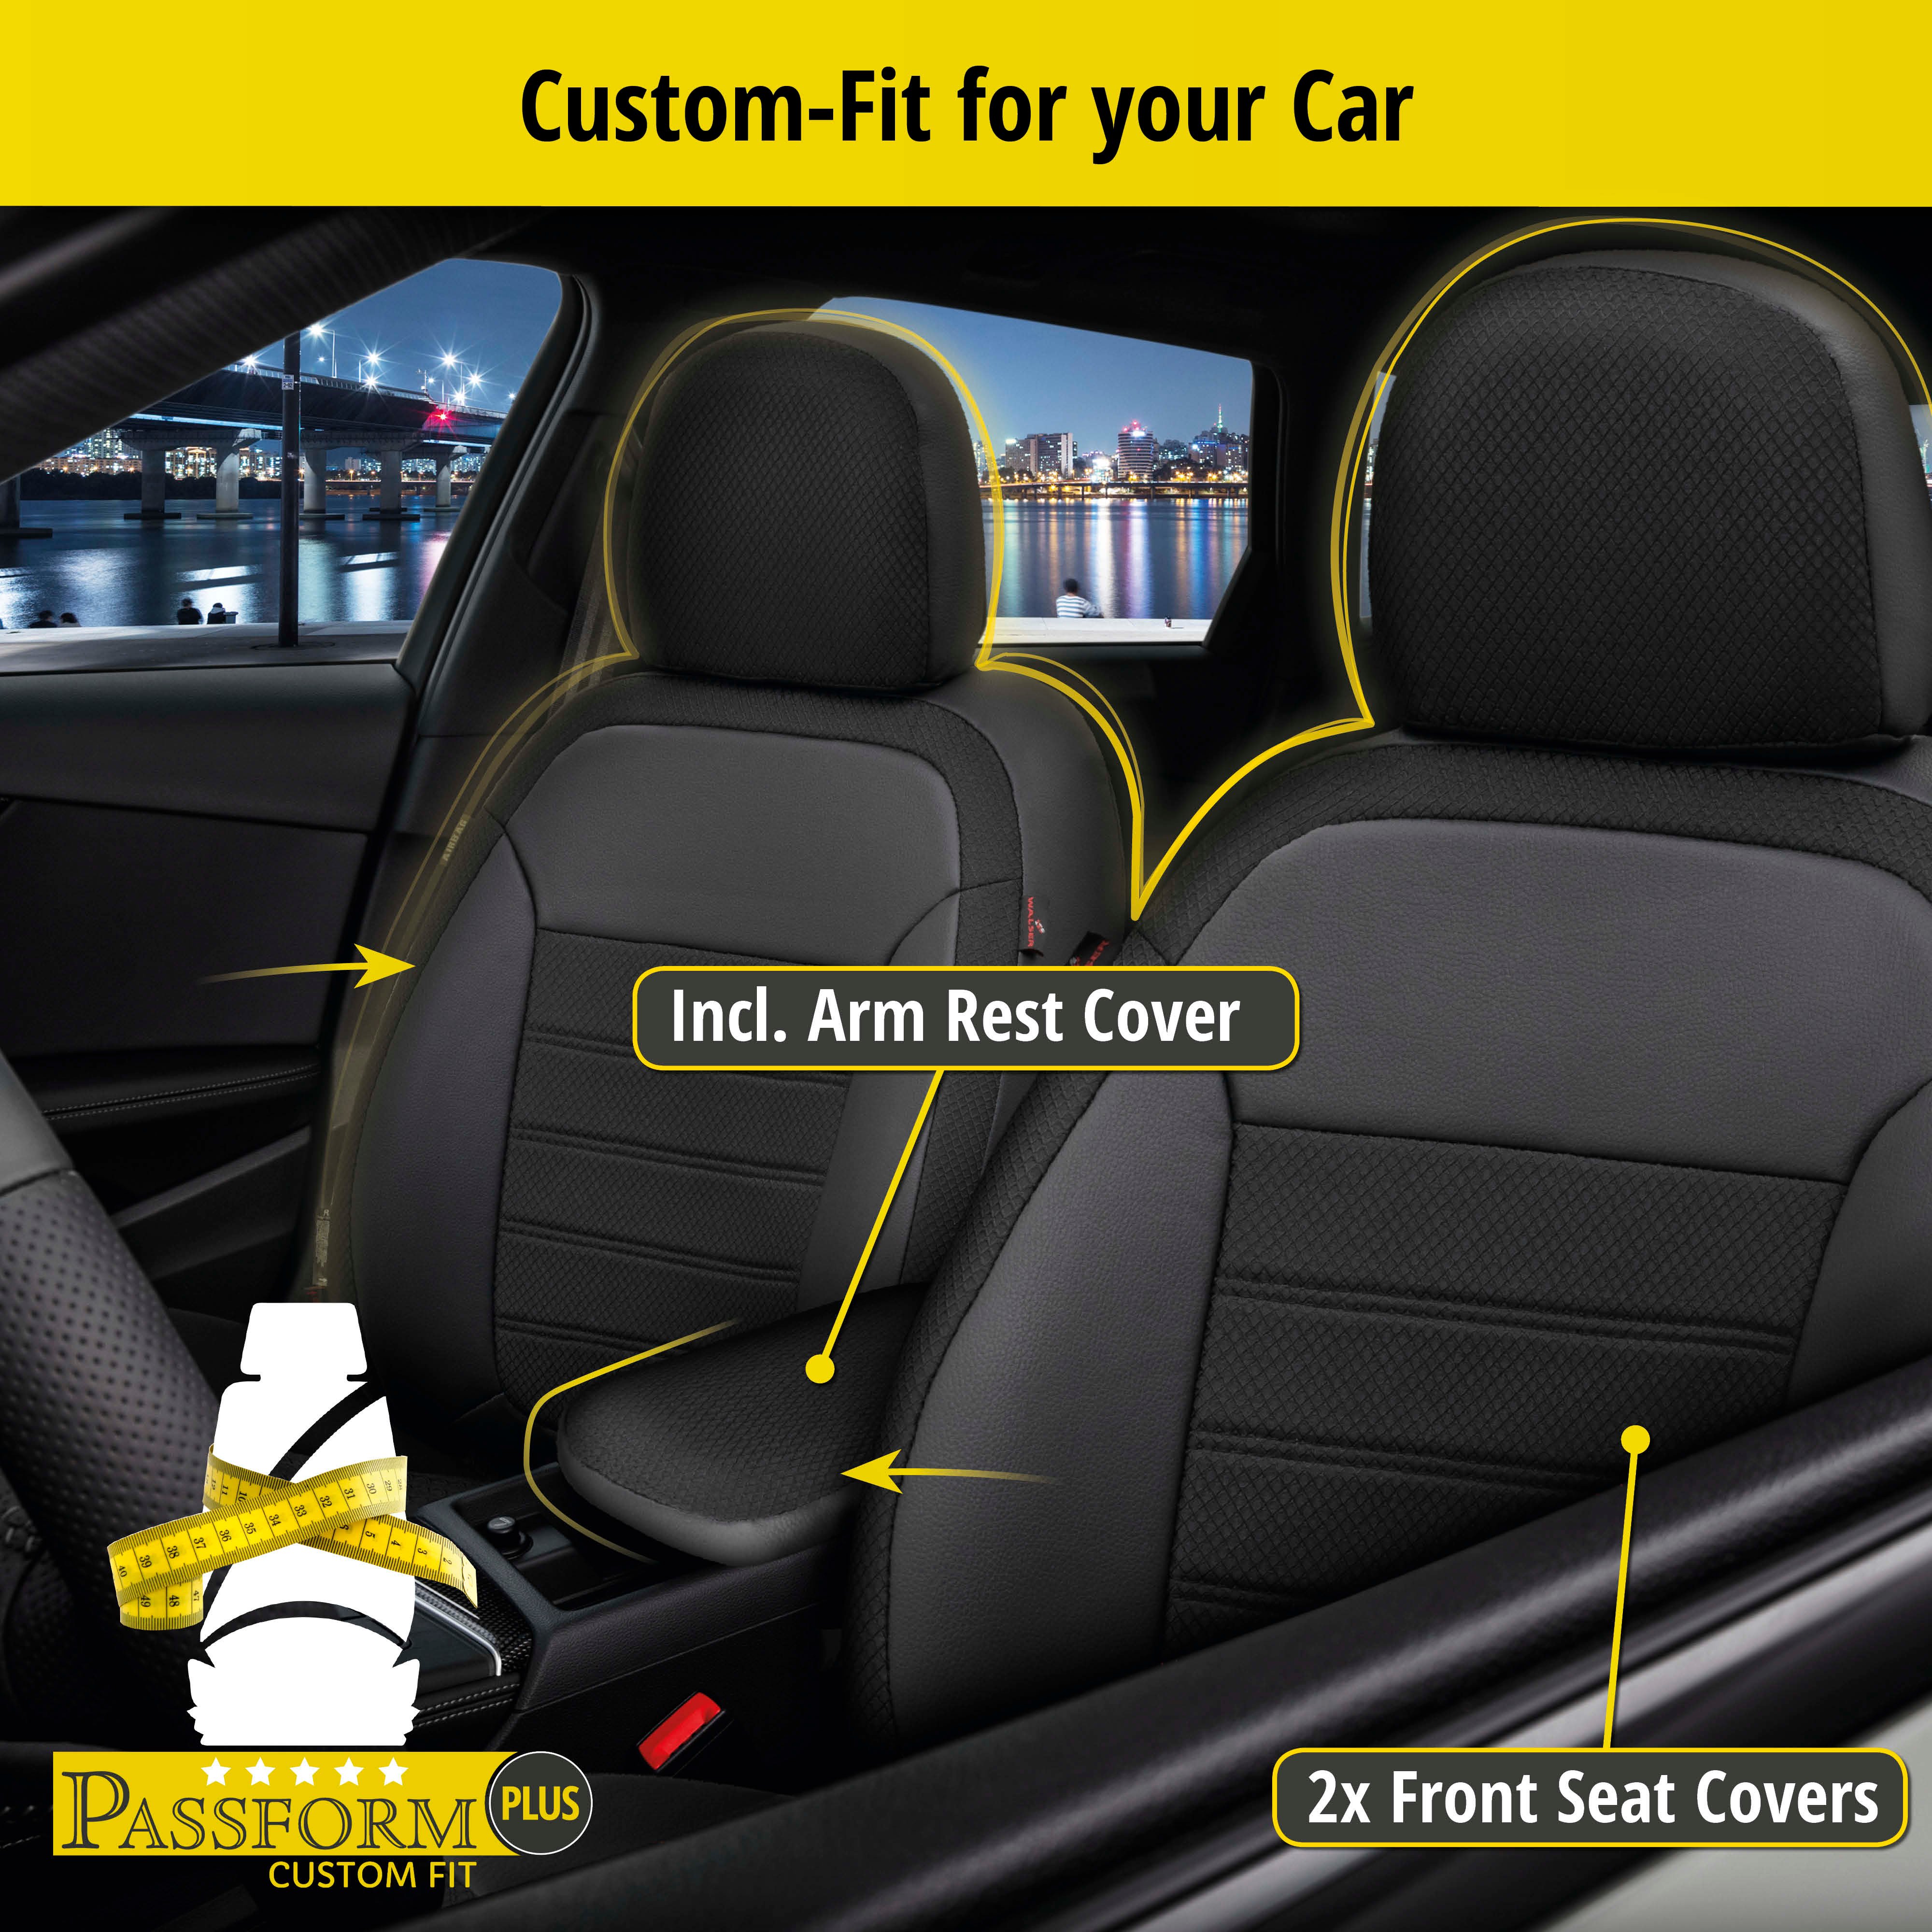 Seat Cover Aversa for Ford Focus 2012-Today, 2 seat covers